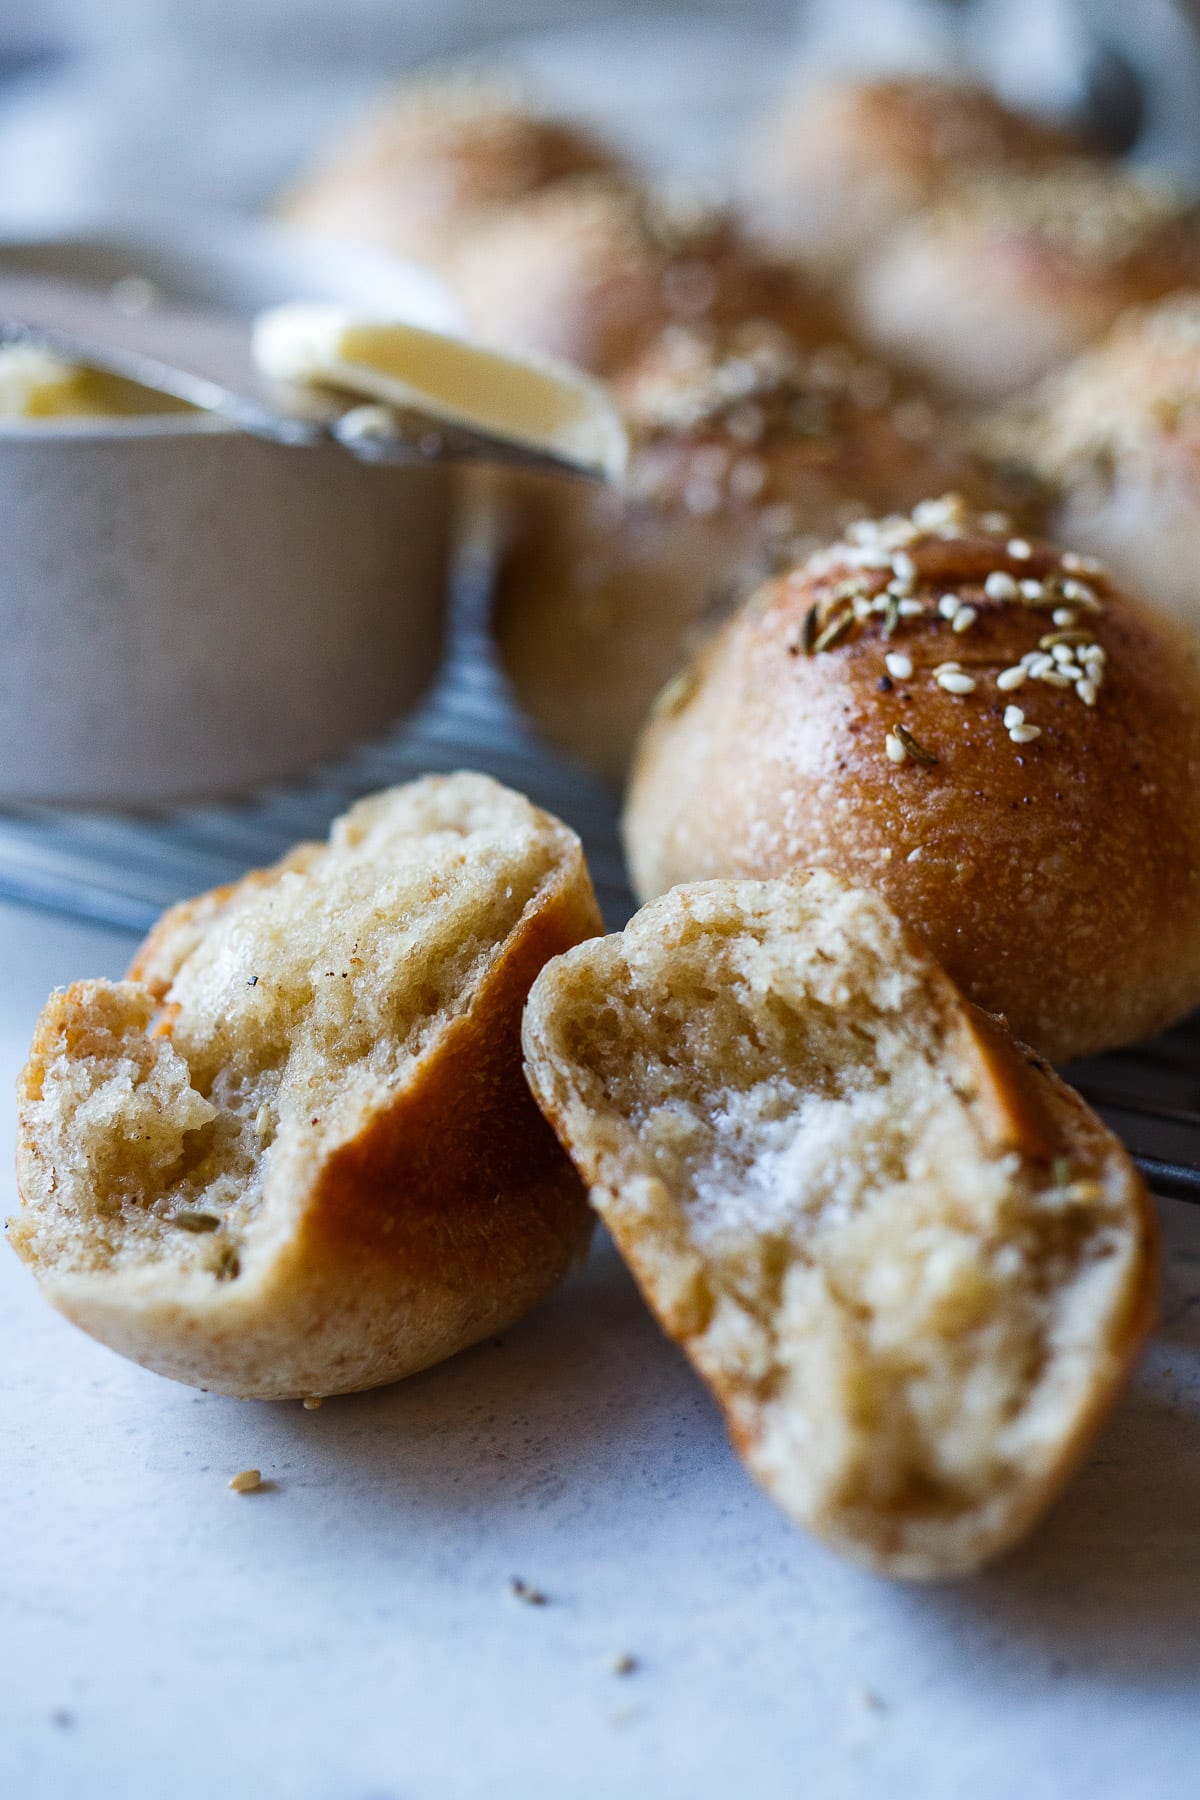 Flavorful, tender sourdough rolls made with sourdough starter, no yeast. Make in one day or refrigerate overnight. They freeze well and are vegan-adaptable!